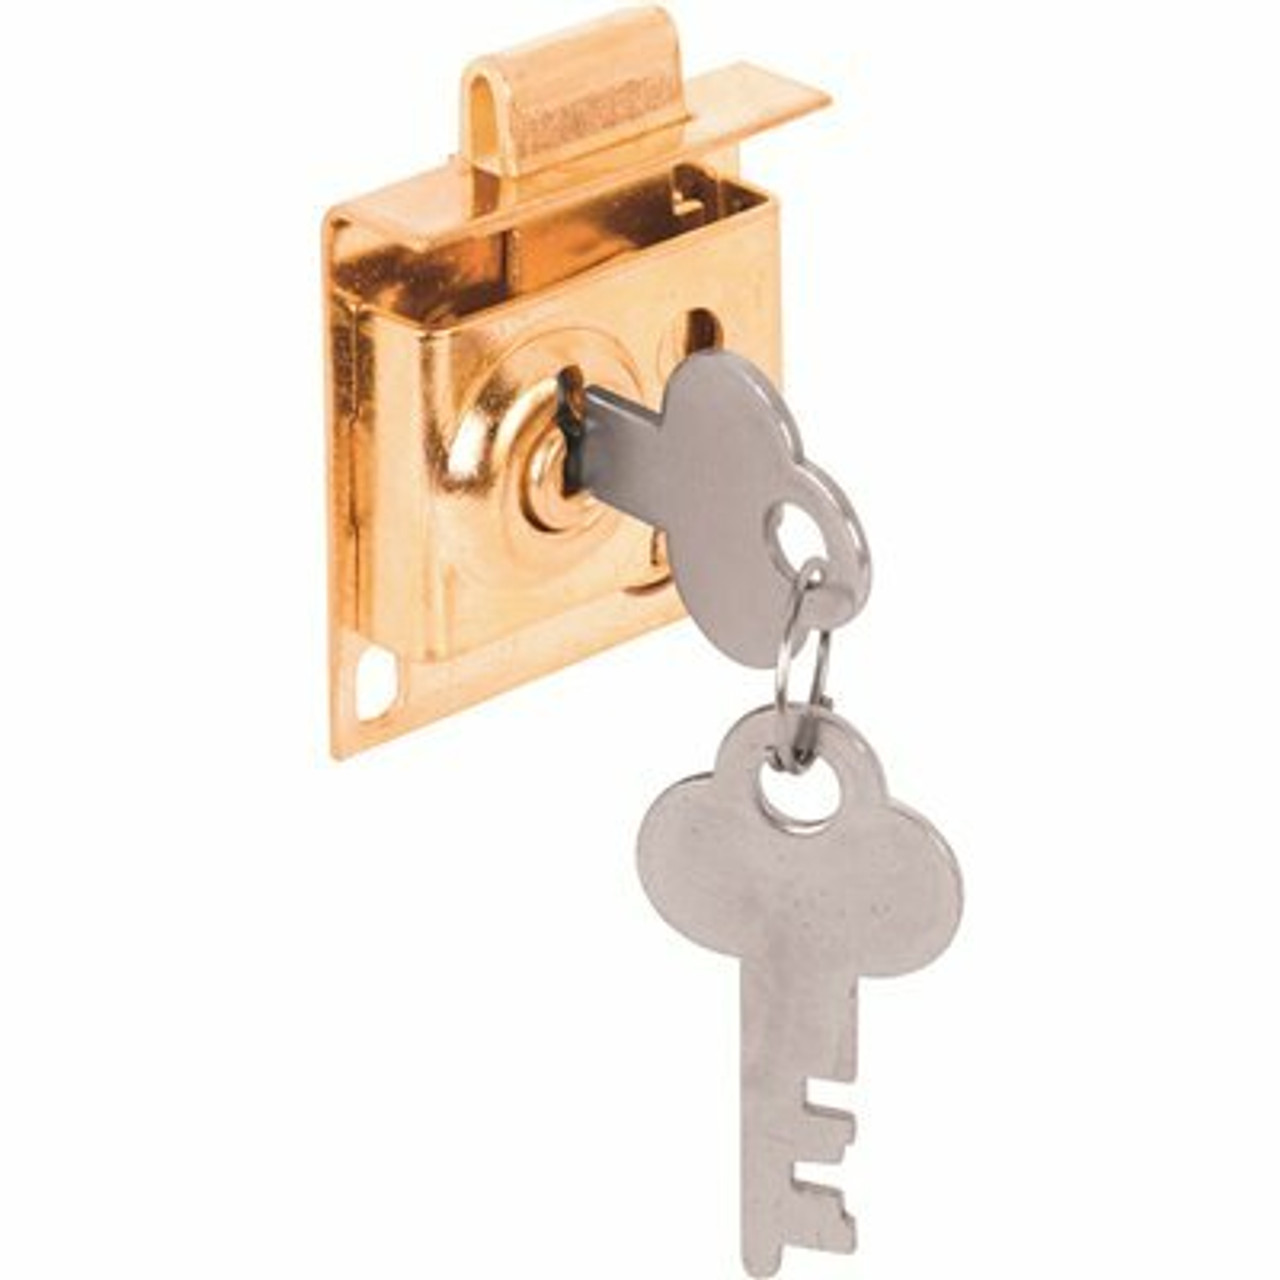 Prime-Line Mail Box Lock, Keyed, 5/16 In. Bolt, Brass Plated Steel